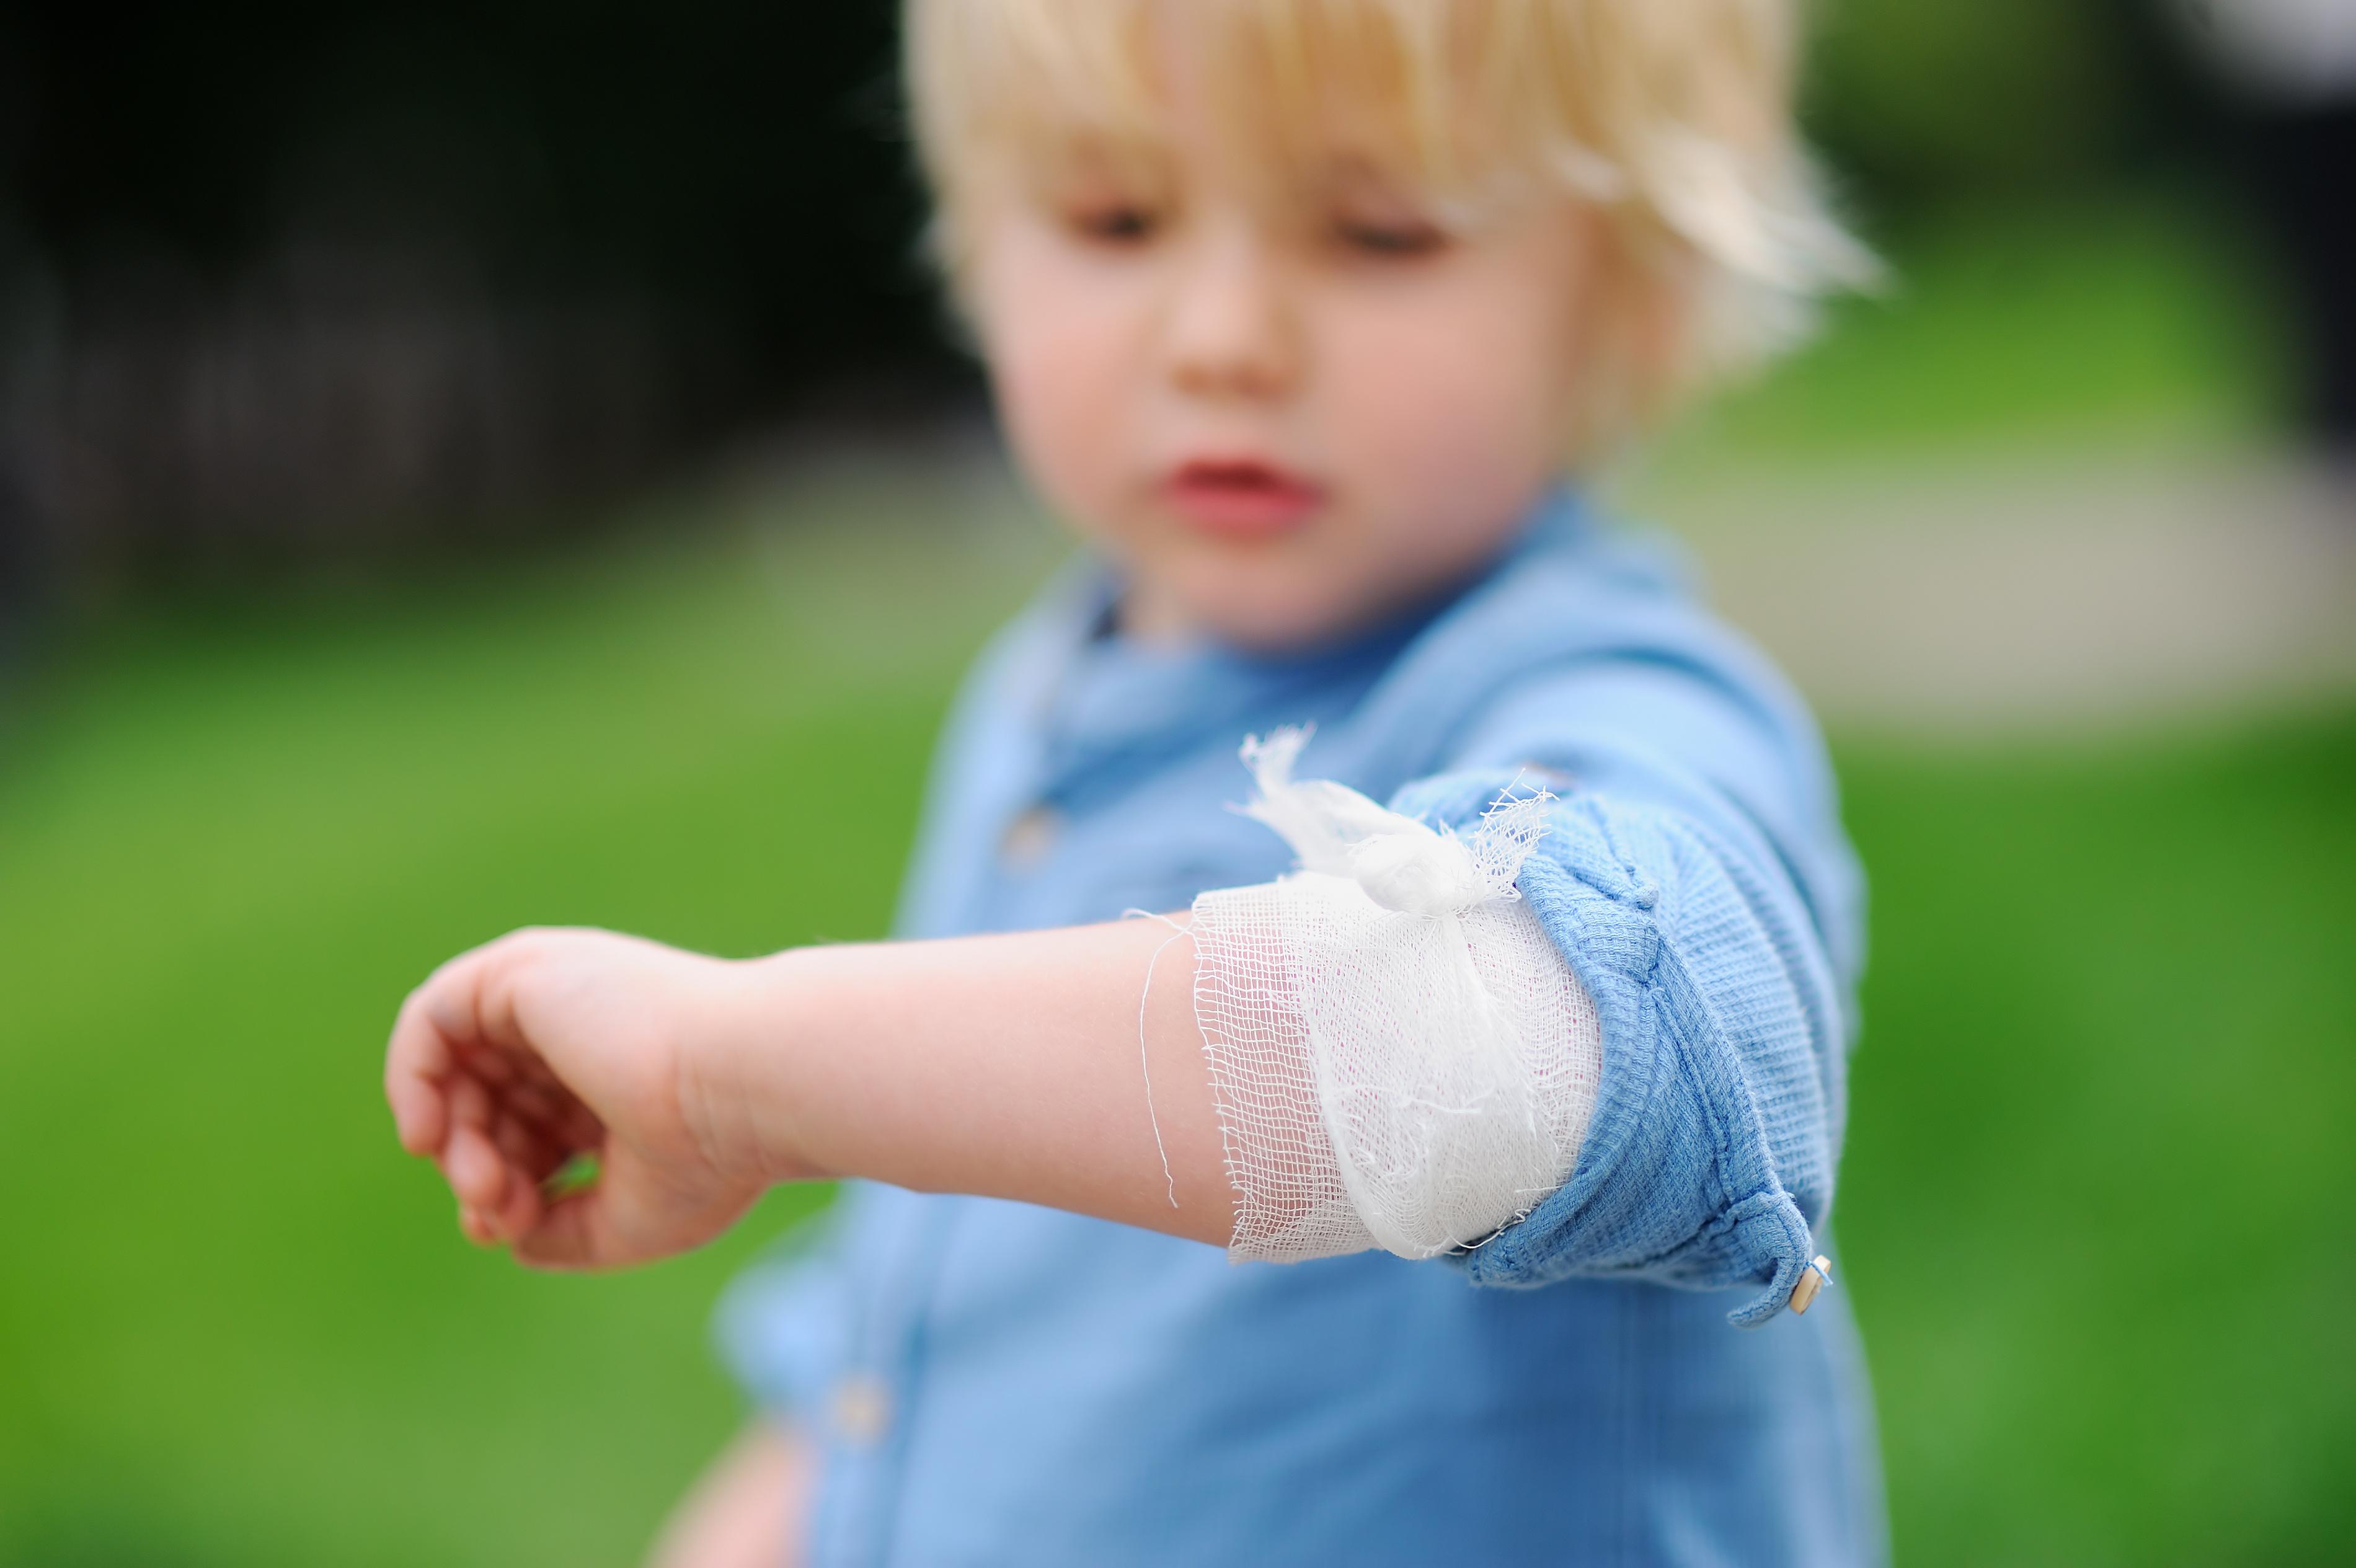 Child with injury on elbow